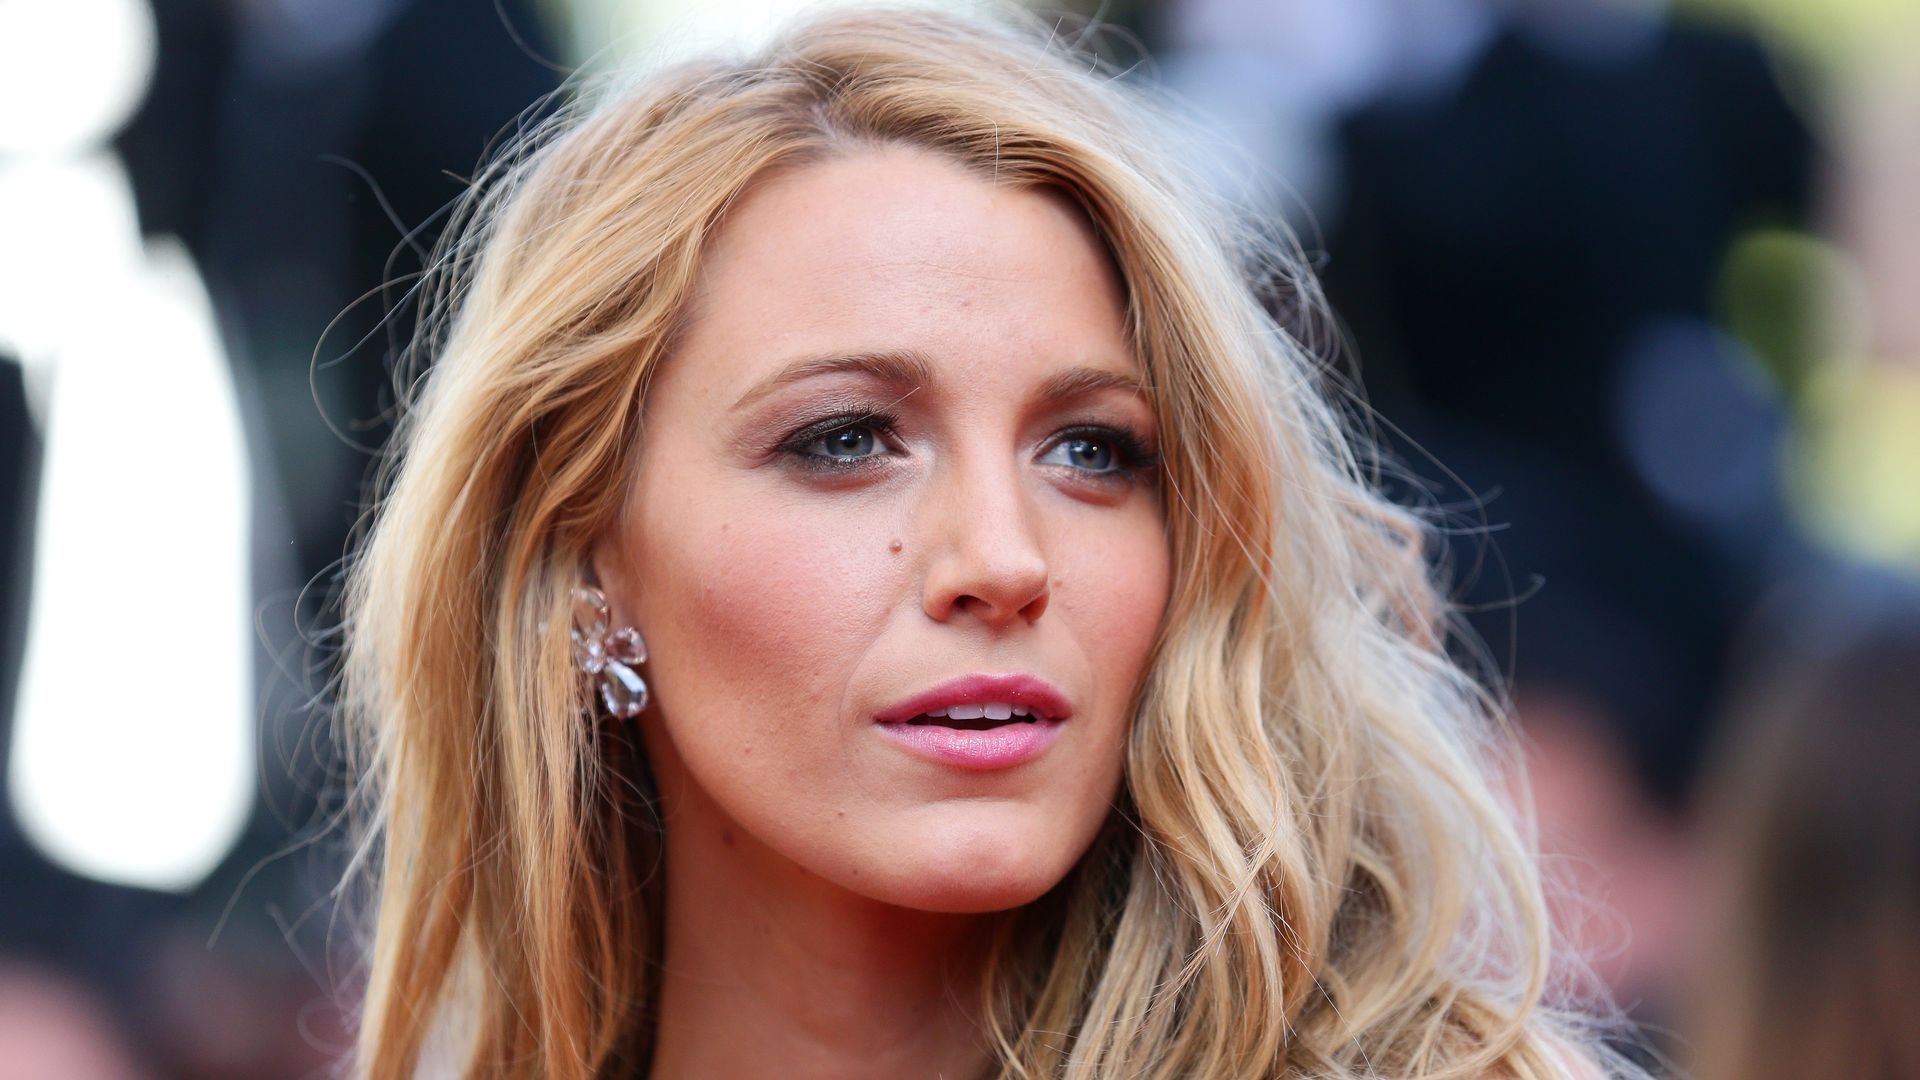 Blake Lively looks stunning in low key casual look as she hits the streets in New York